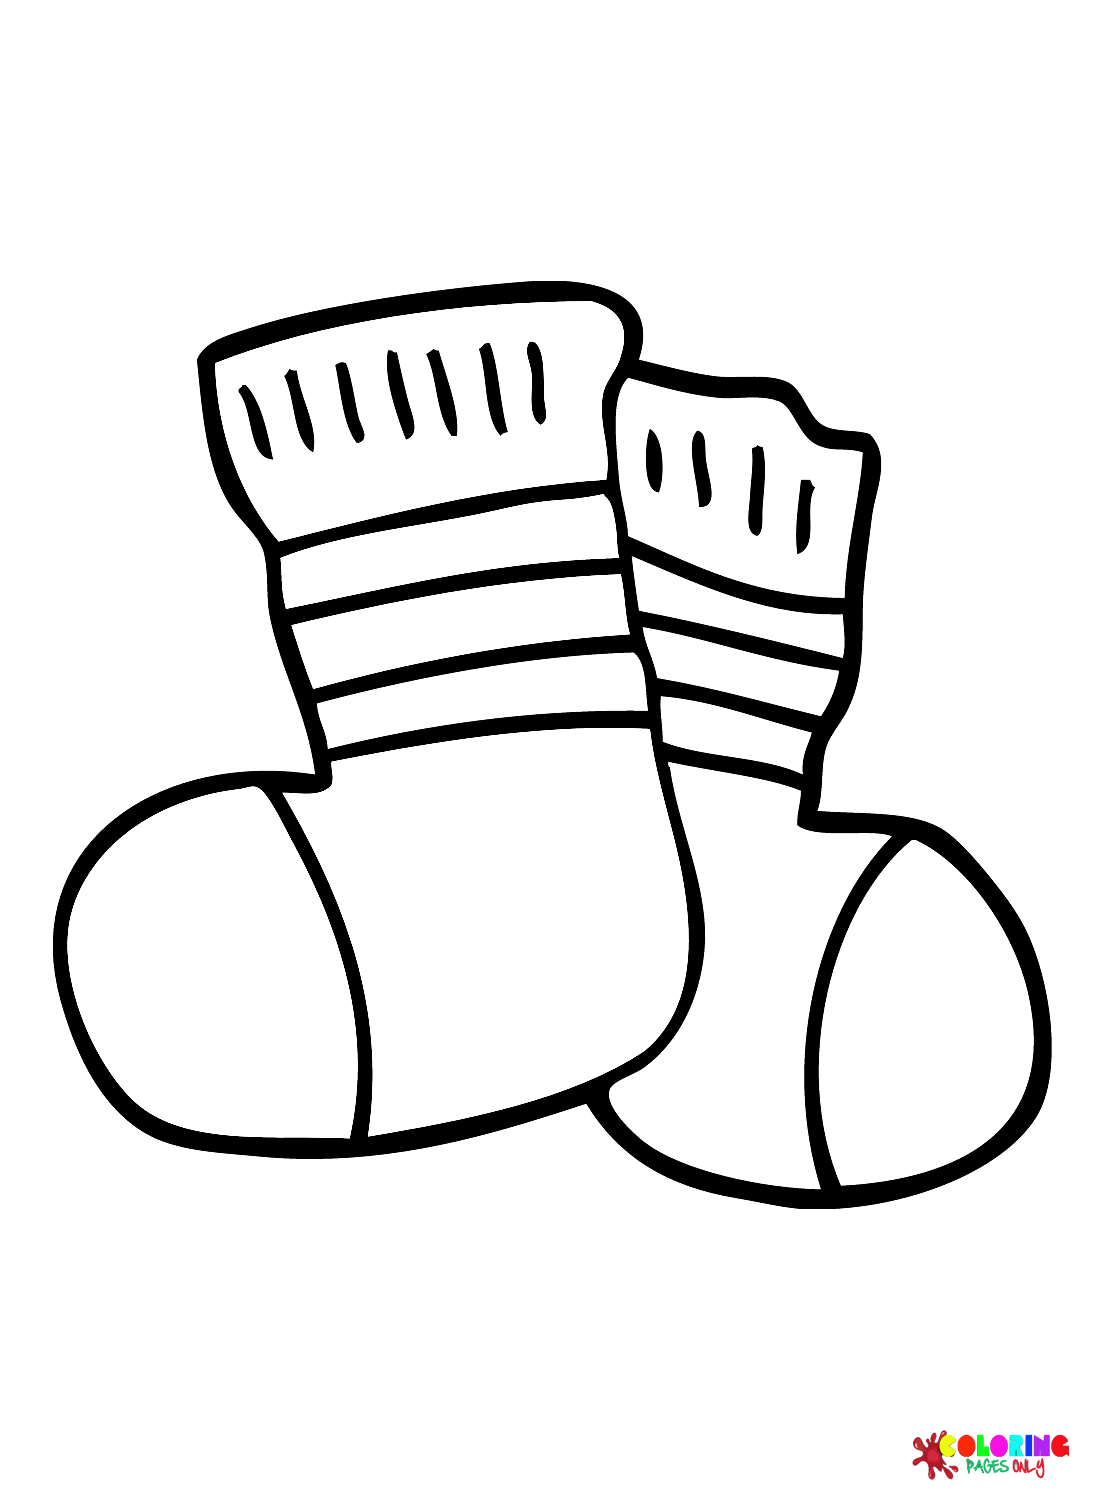 Images Socks Coloring Page - Free Printable Coloring Pages